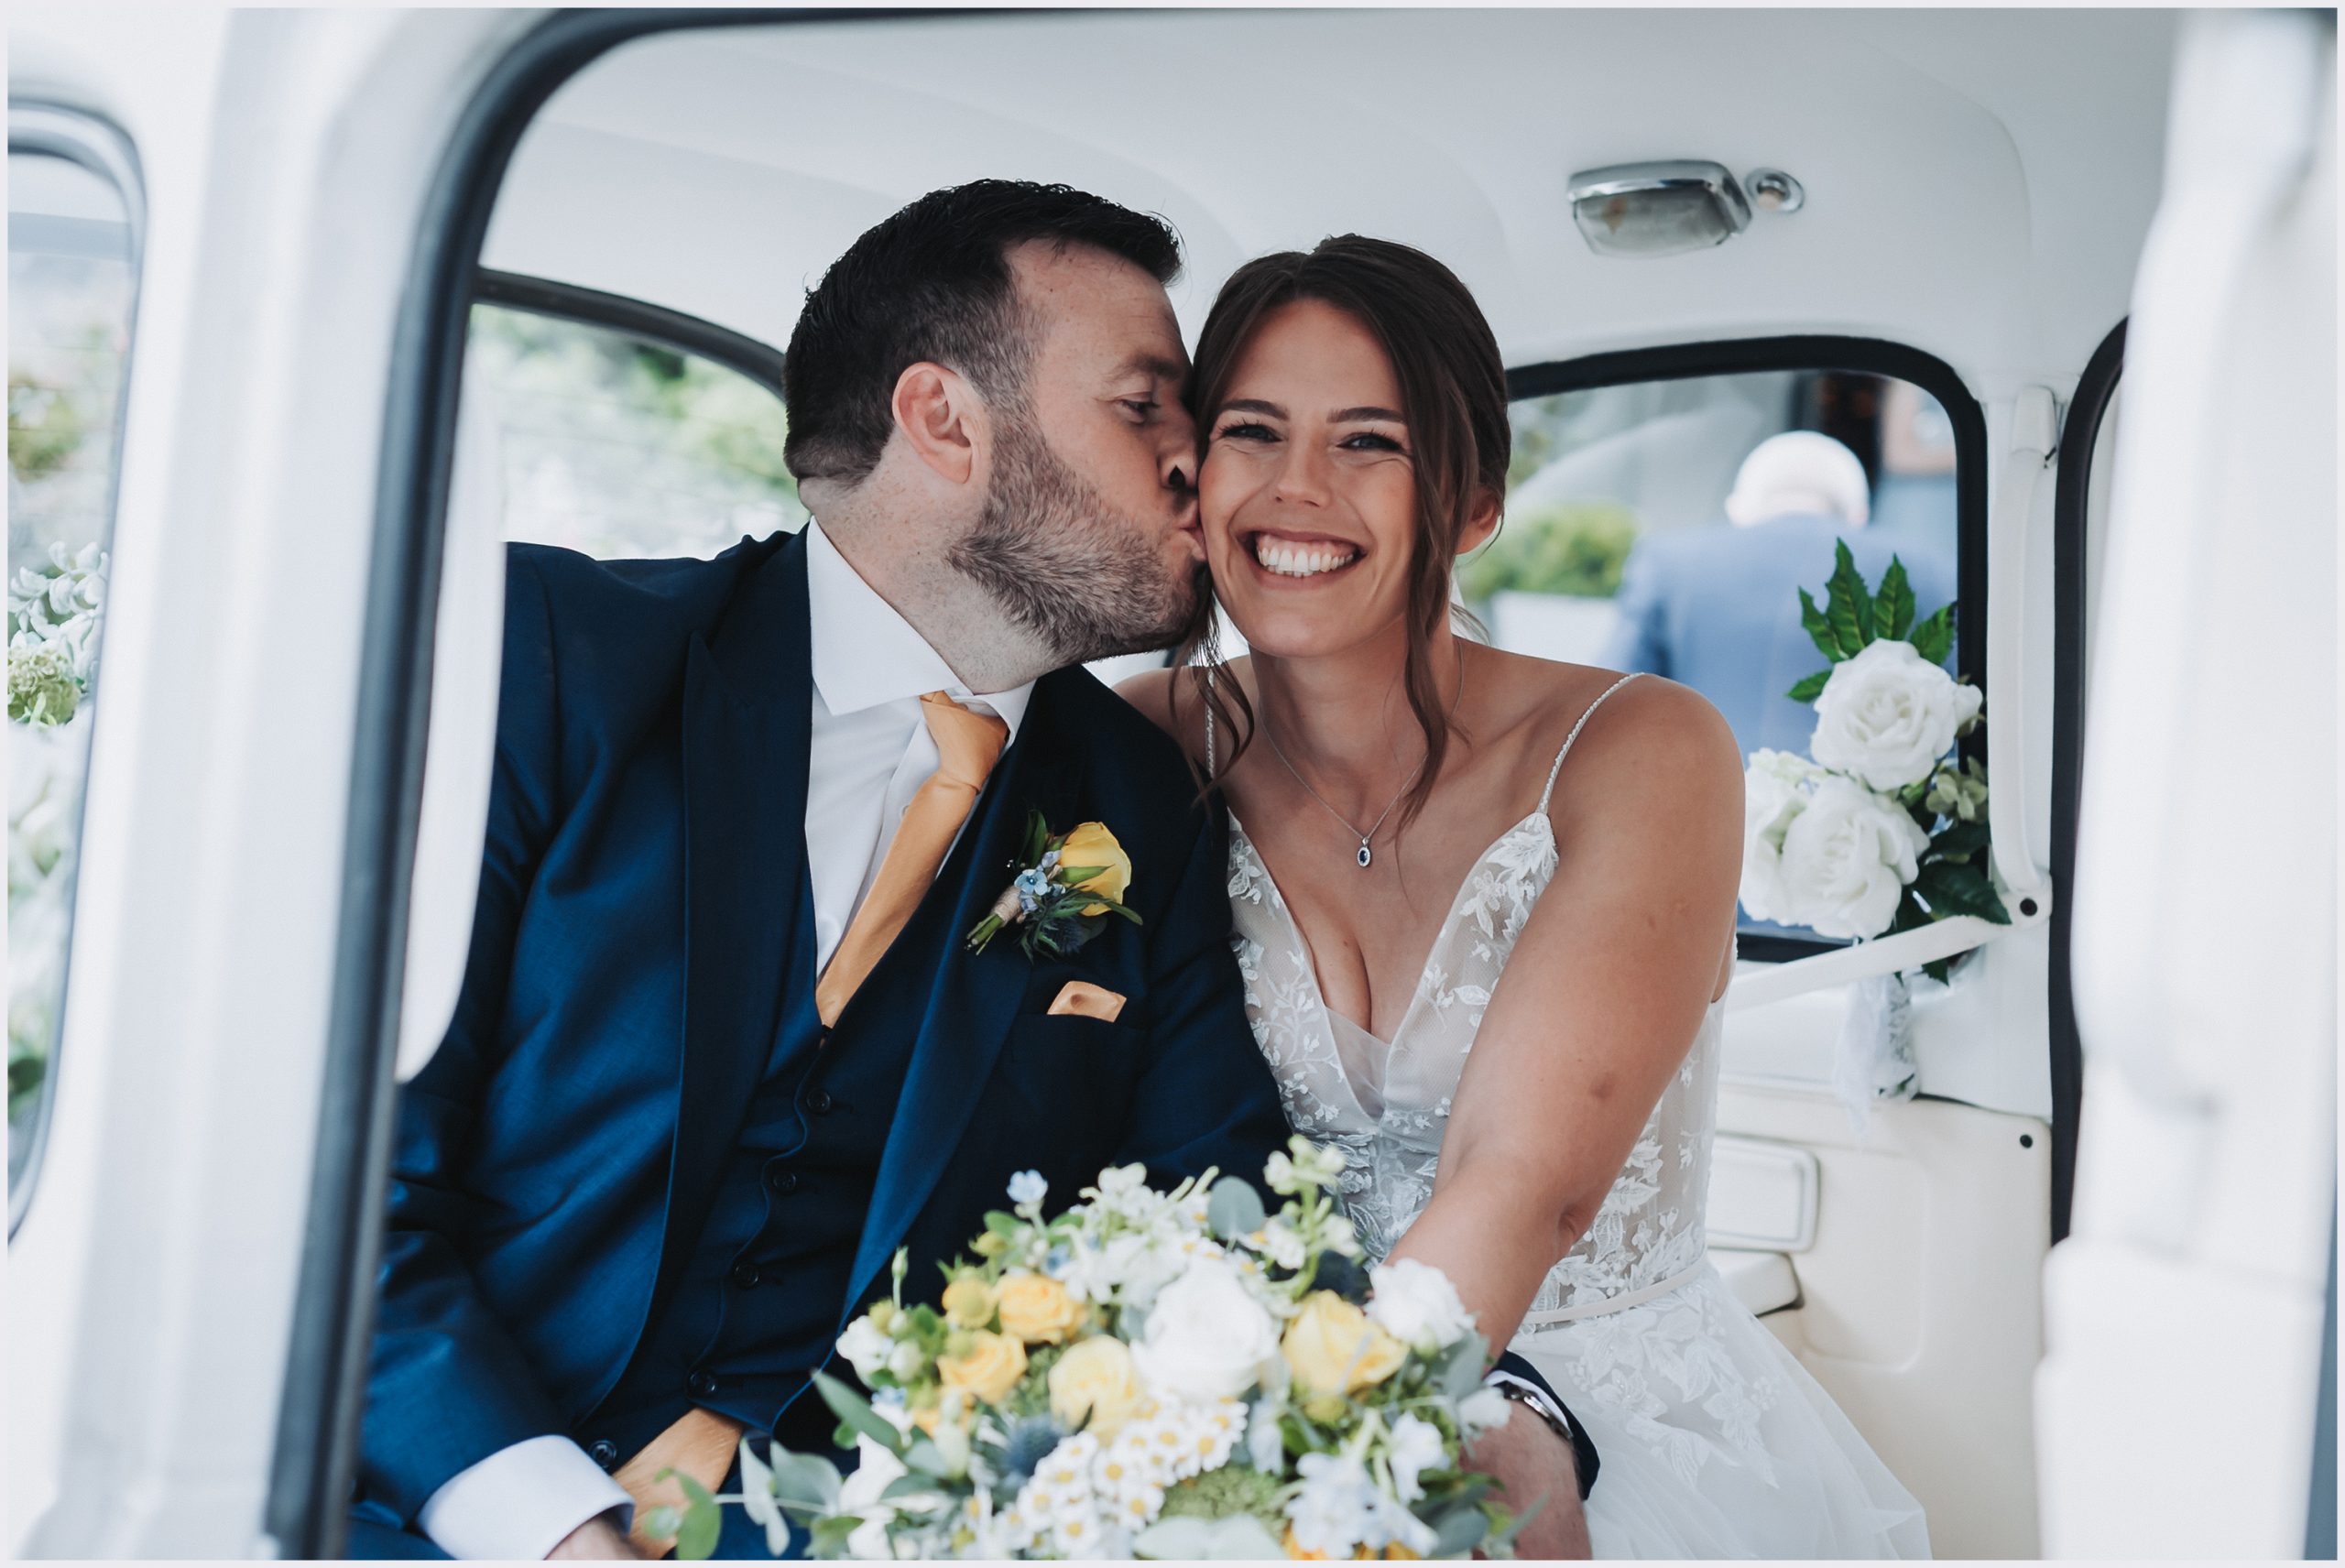 A groom kisses his wife's cheek as she beams at the camera while sitting in their wedding car after thier wedding ceremony.  Image taken by Helena Jayne Photography a wedding photographer based and covering north Wales